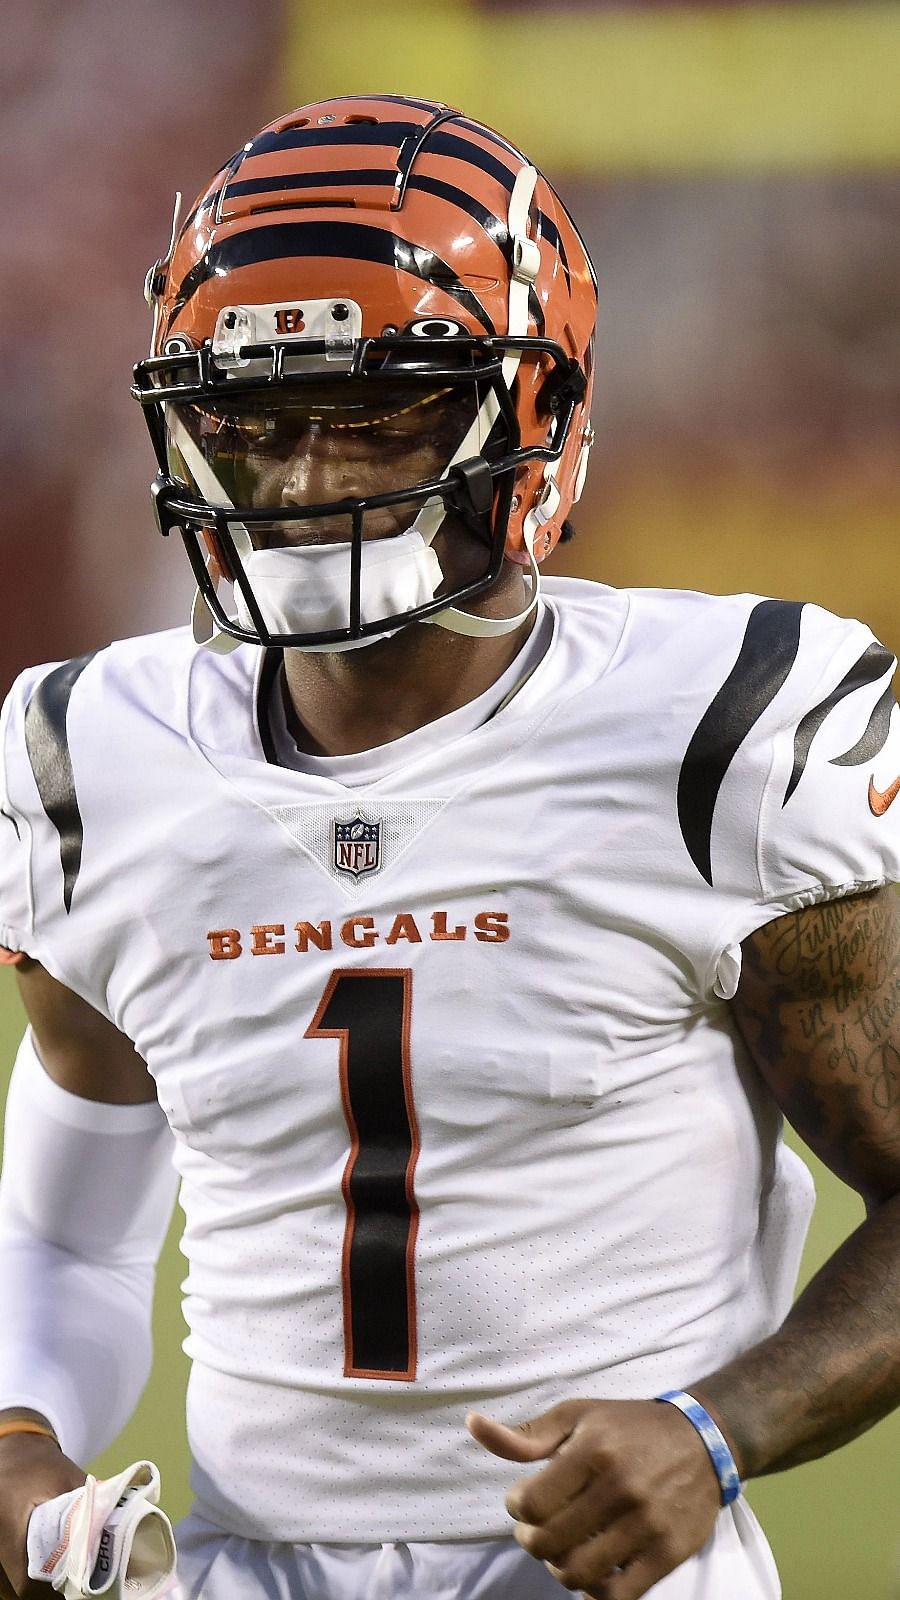 Did the Bengals make a mistake by drafting Ja'Marr Chase over Penei Sewell?